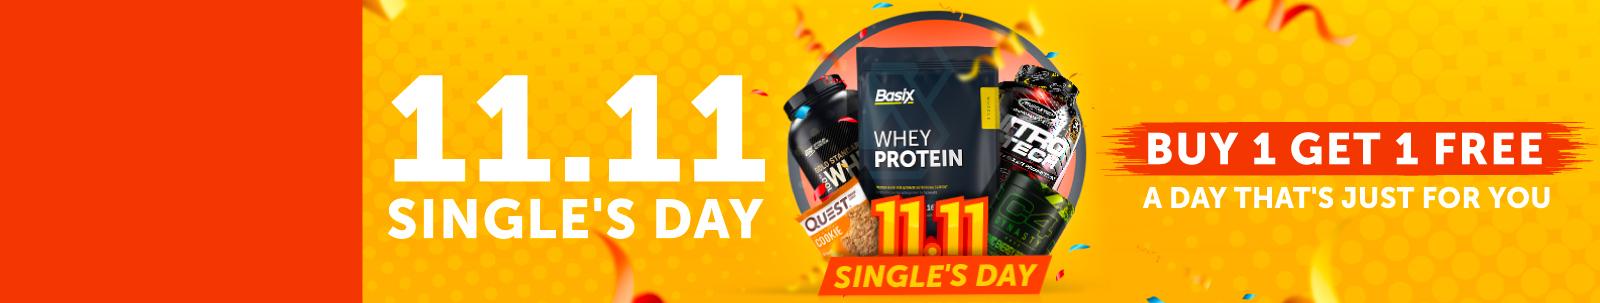 Singles Day Offers image